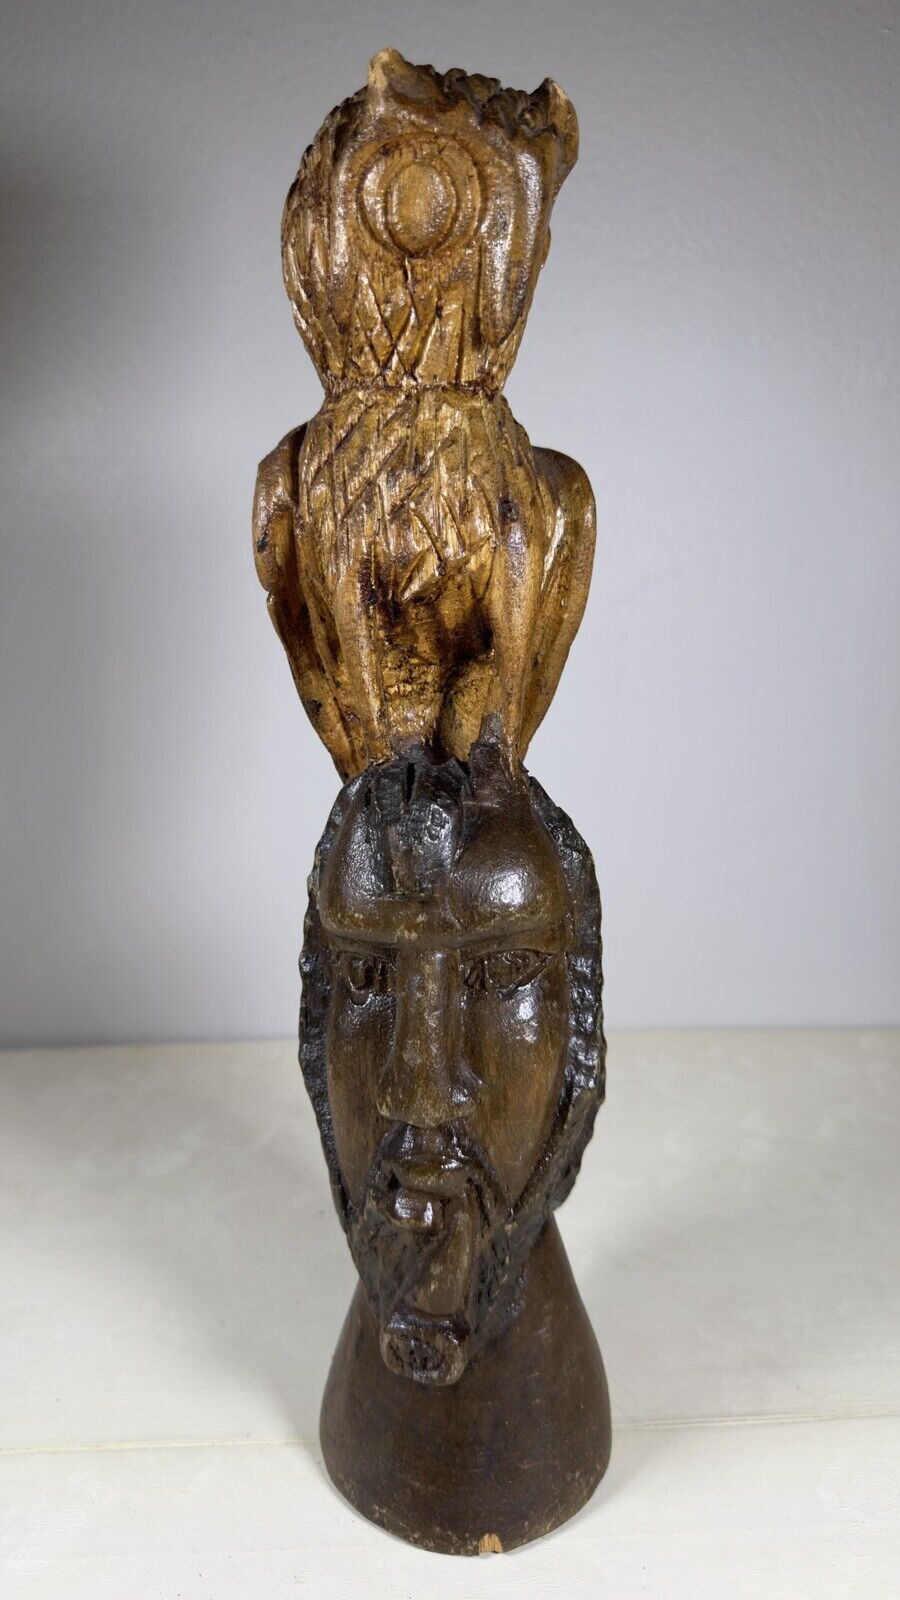 Wooden sculpture of an owl on its head